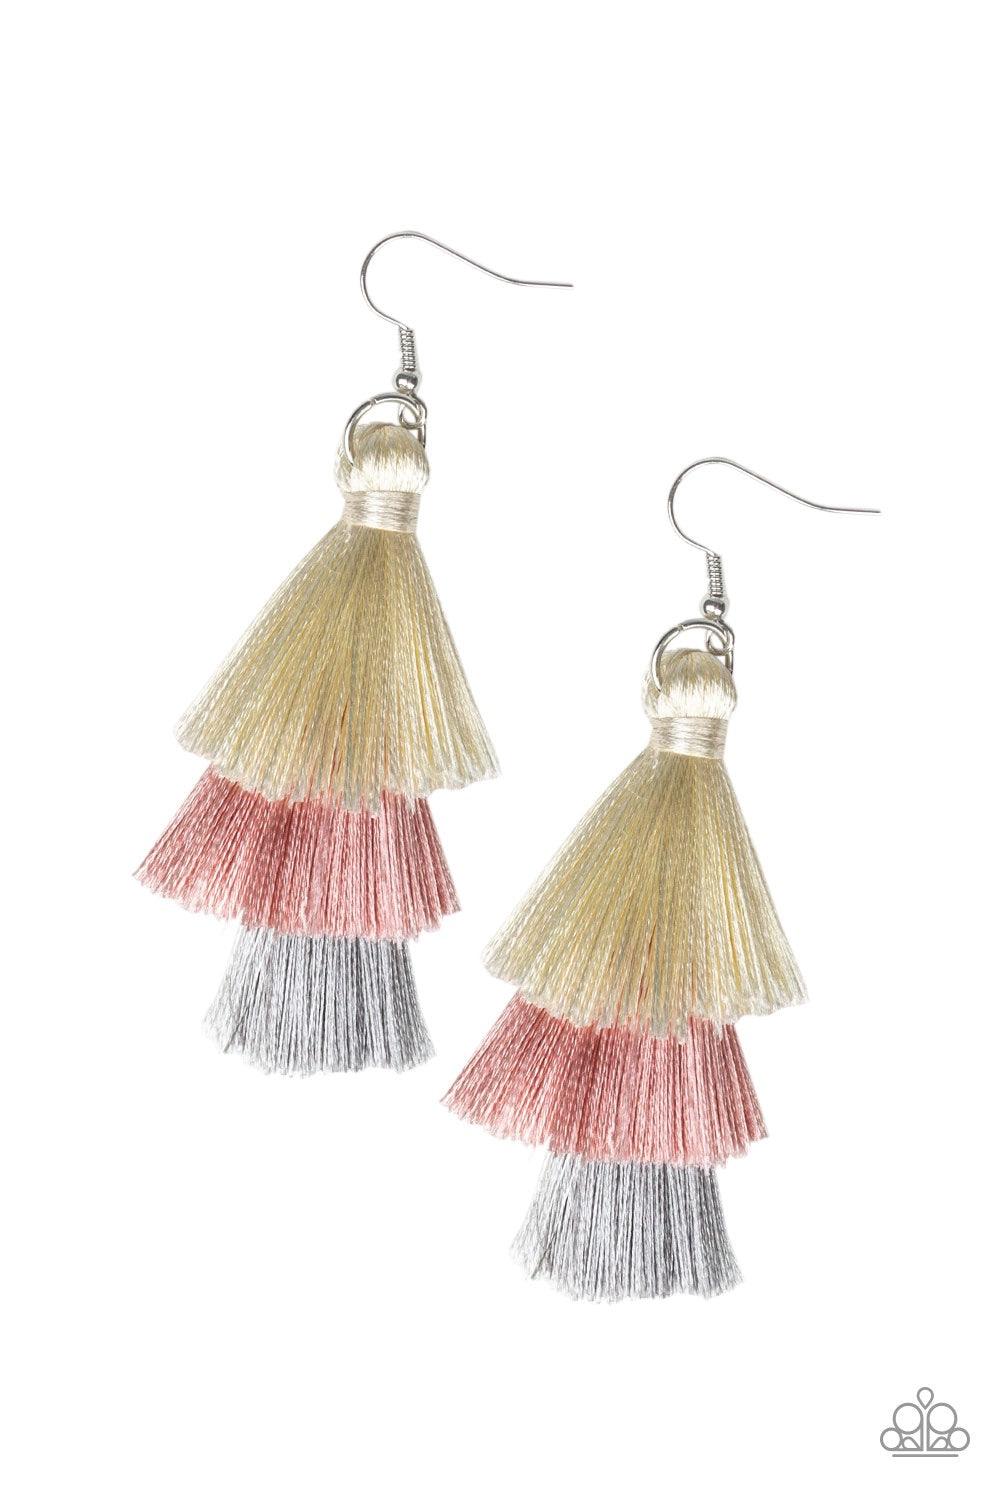 Paparazzi Accessories Hold On To Your Tassel! - Pink Featuring white, pink, and gray thread, a 3-tiered tassel swings from the ear for a flirtatious look. Earring attaches to a standard fishhook fitting. Jewelry